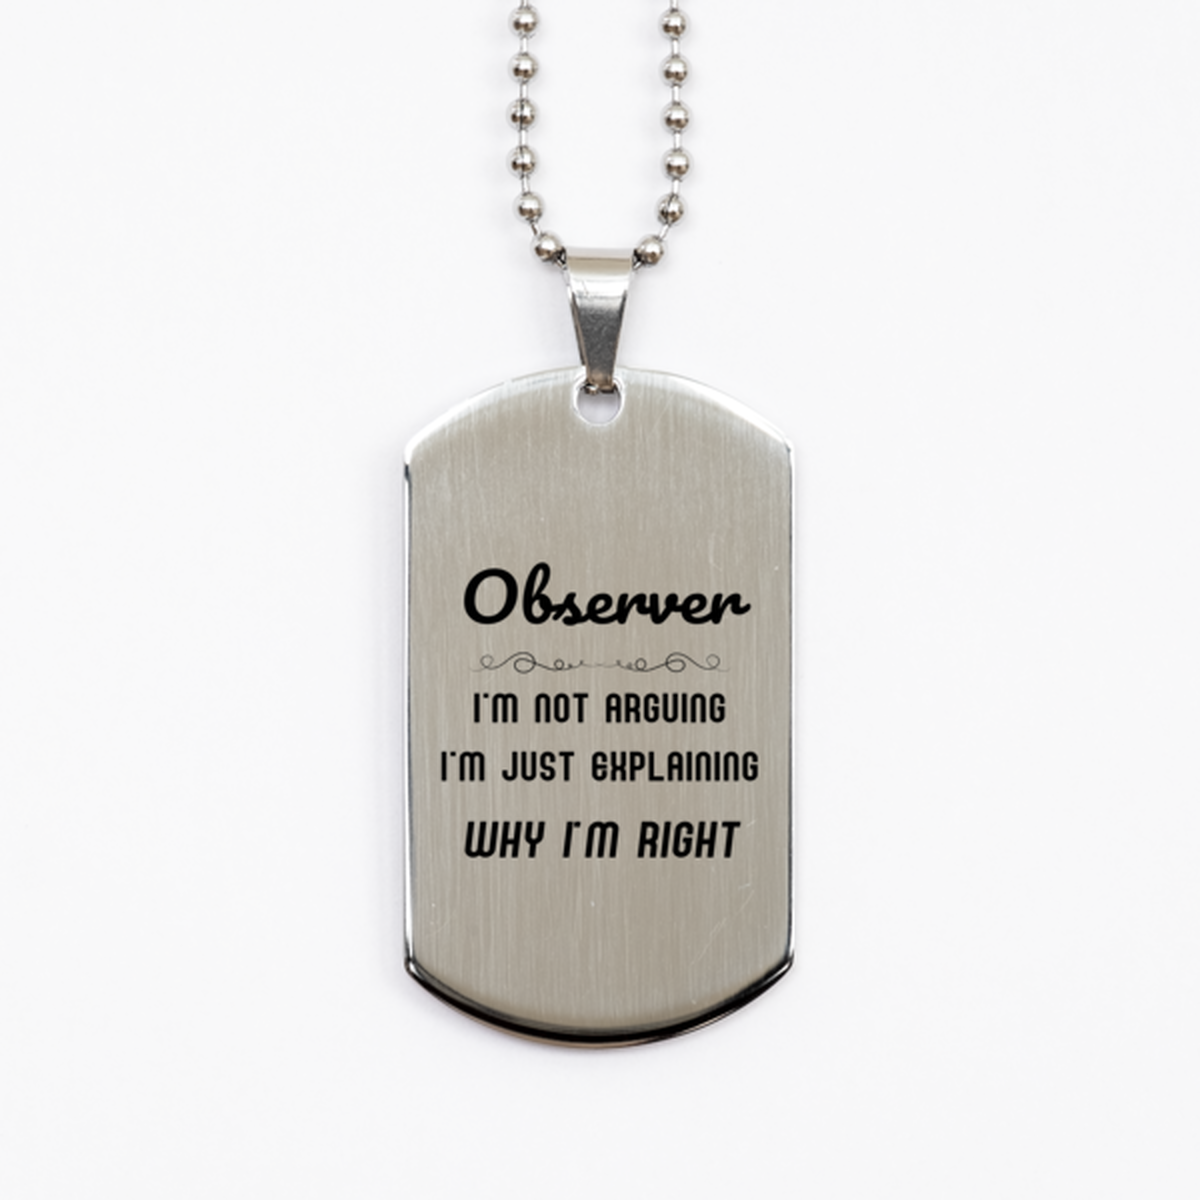 Observer I'm not Arguing. I'm Just Explaining Why I'm RIGHT Silver Dog Tag, Funny Saying Quote Observer Gifts For Observer Graduation Birthday Christmas Gifts for Men Women Coworker